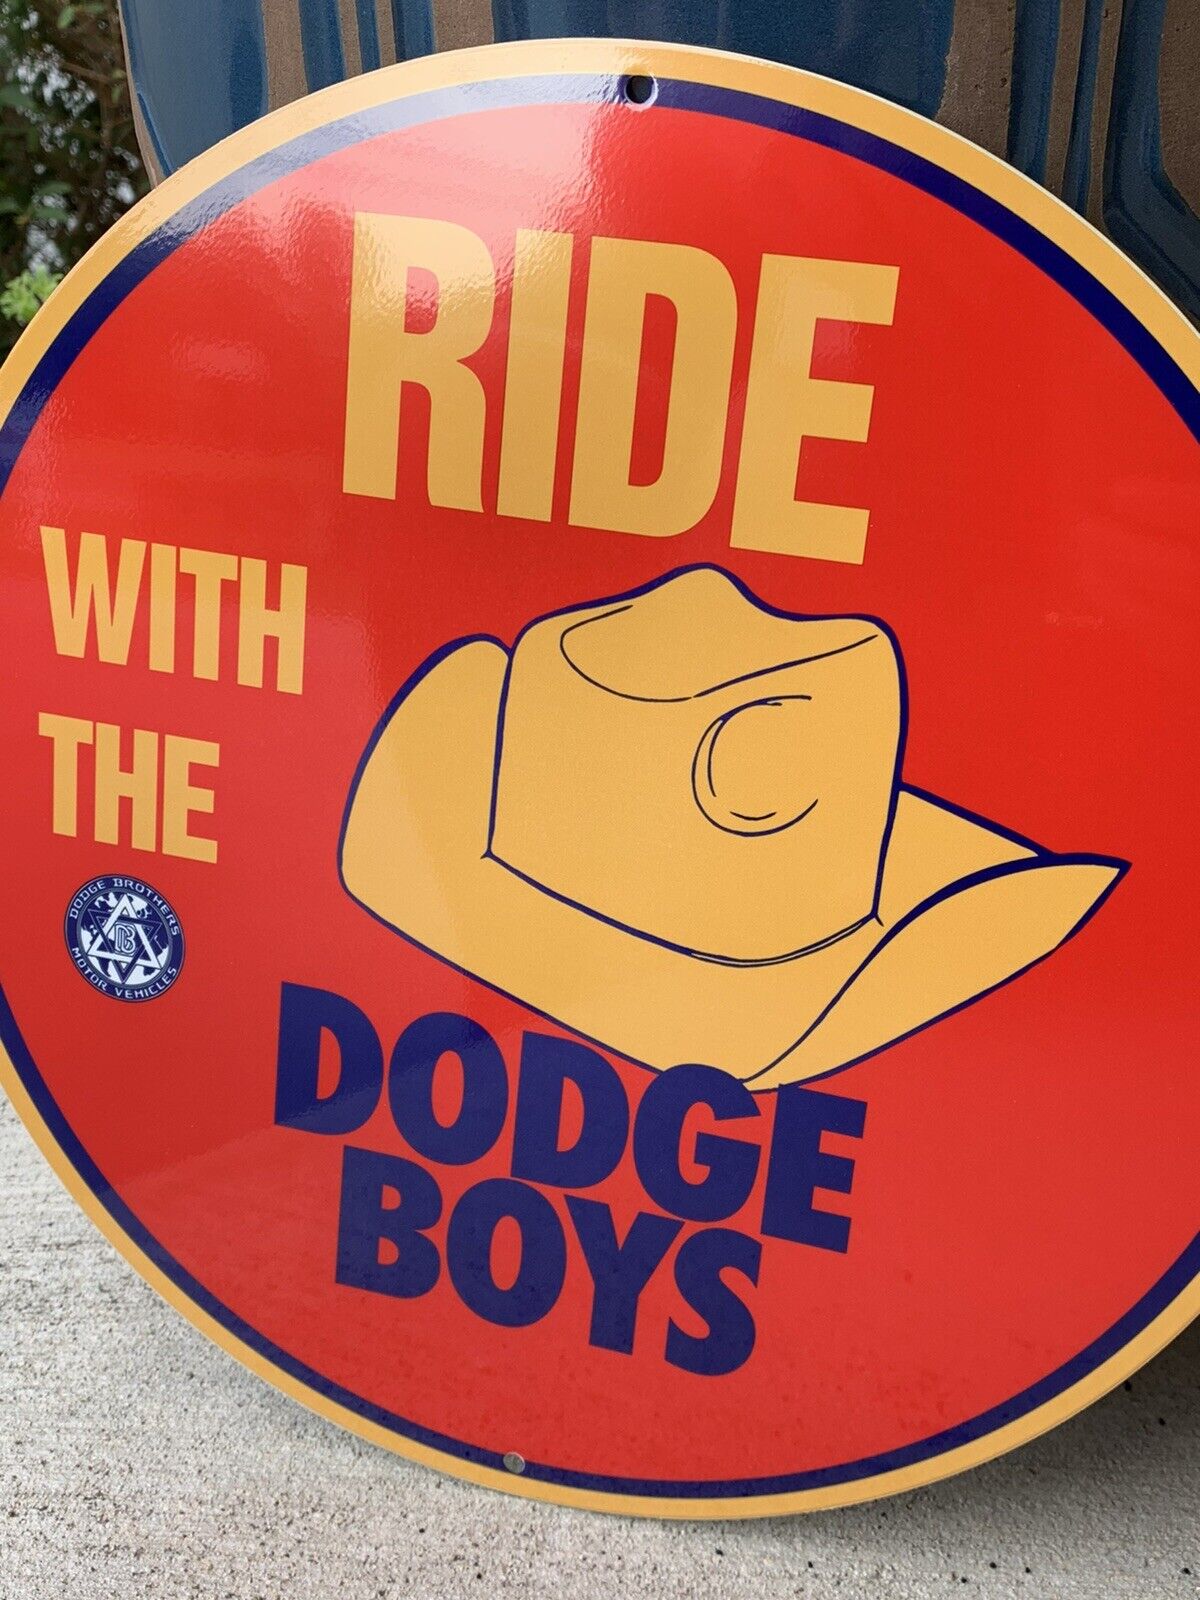 Vintage Style Ride With Dodge Boys Brothers  Metal Heavy Steel Quality Sign